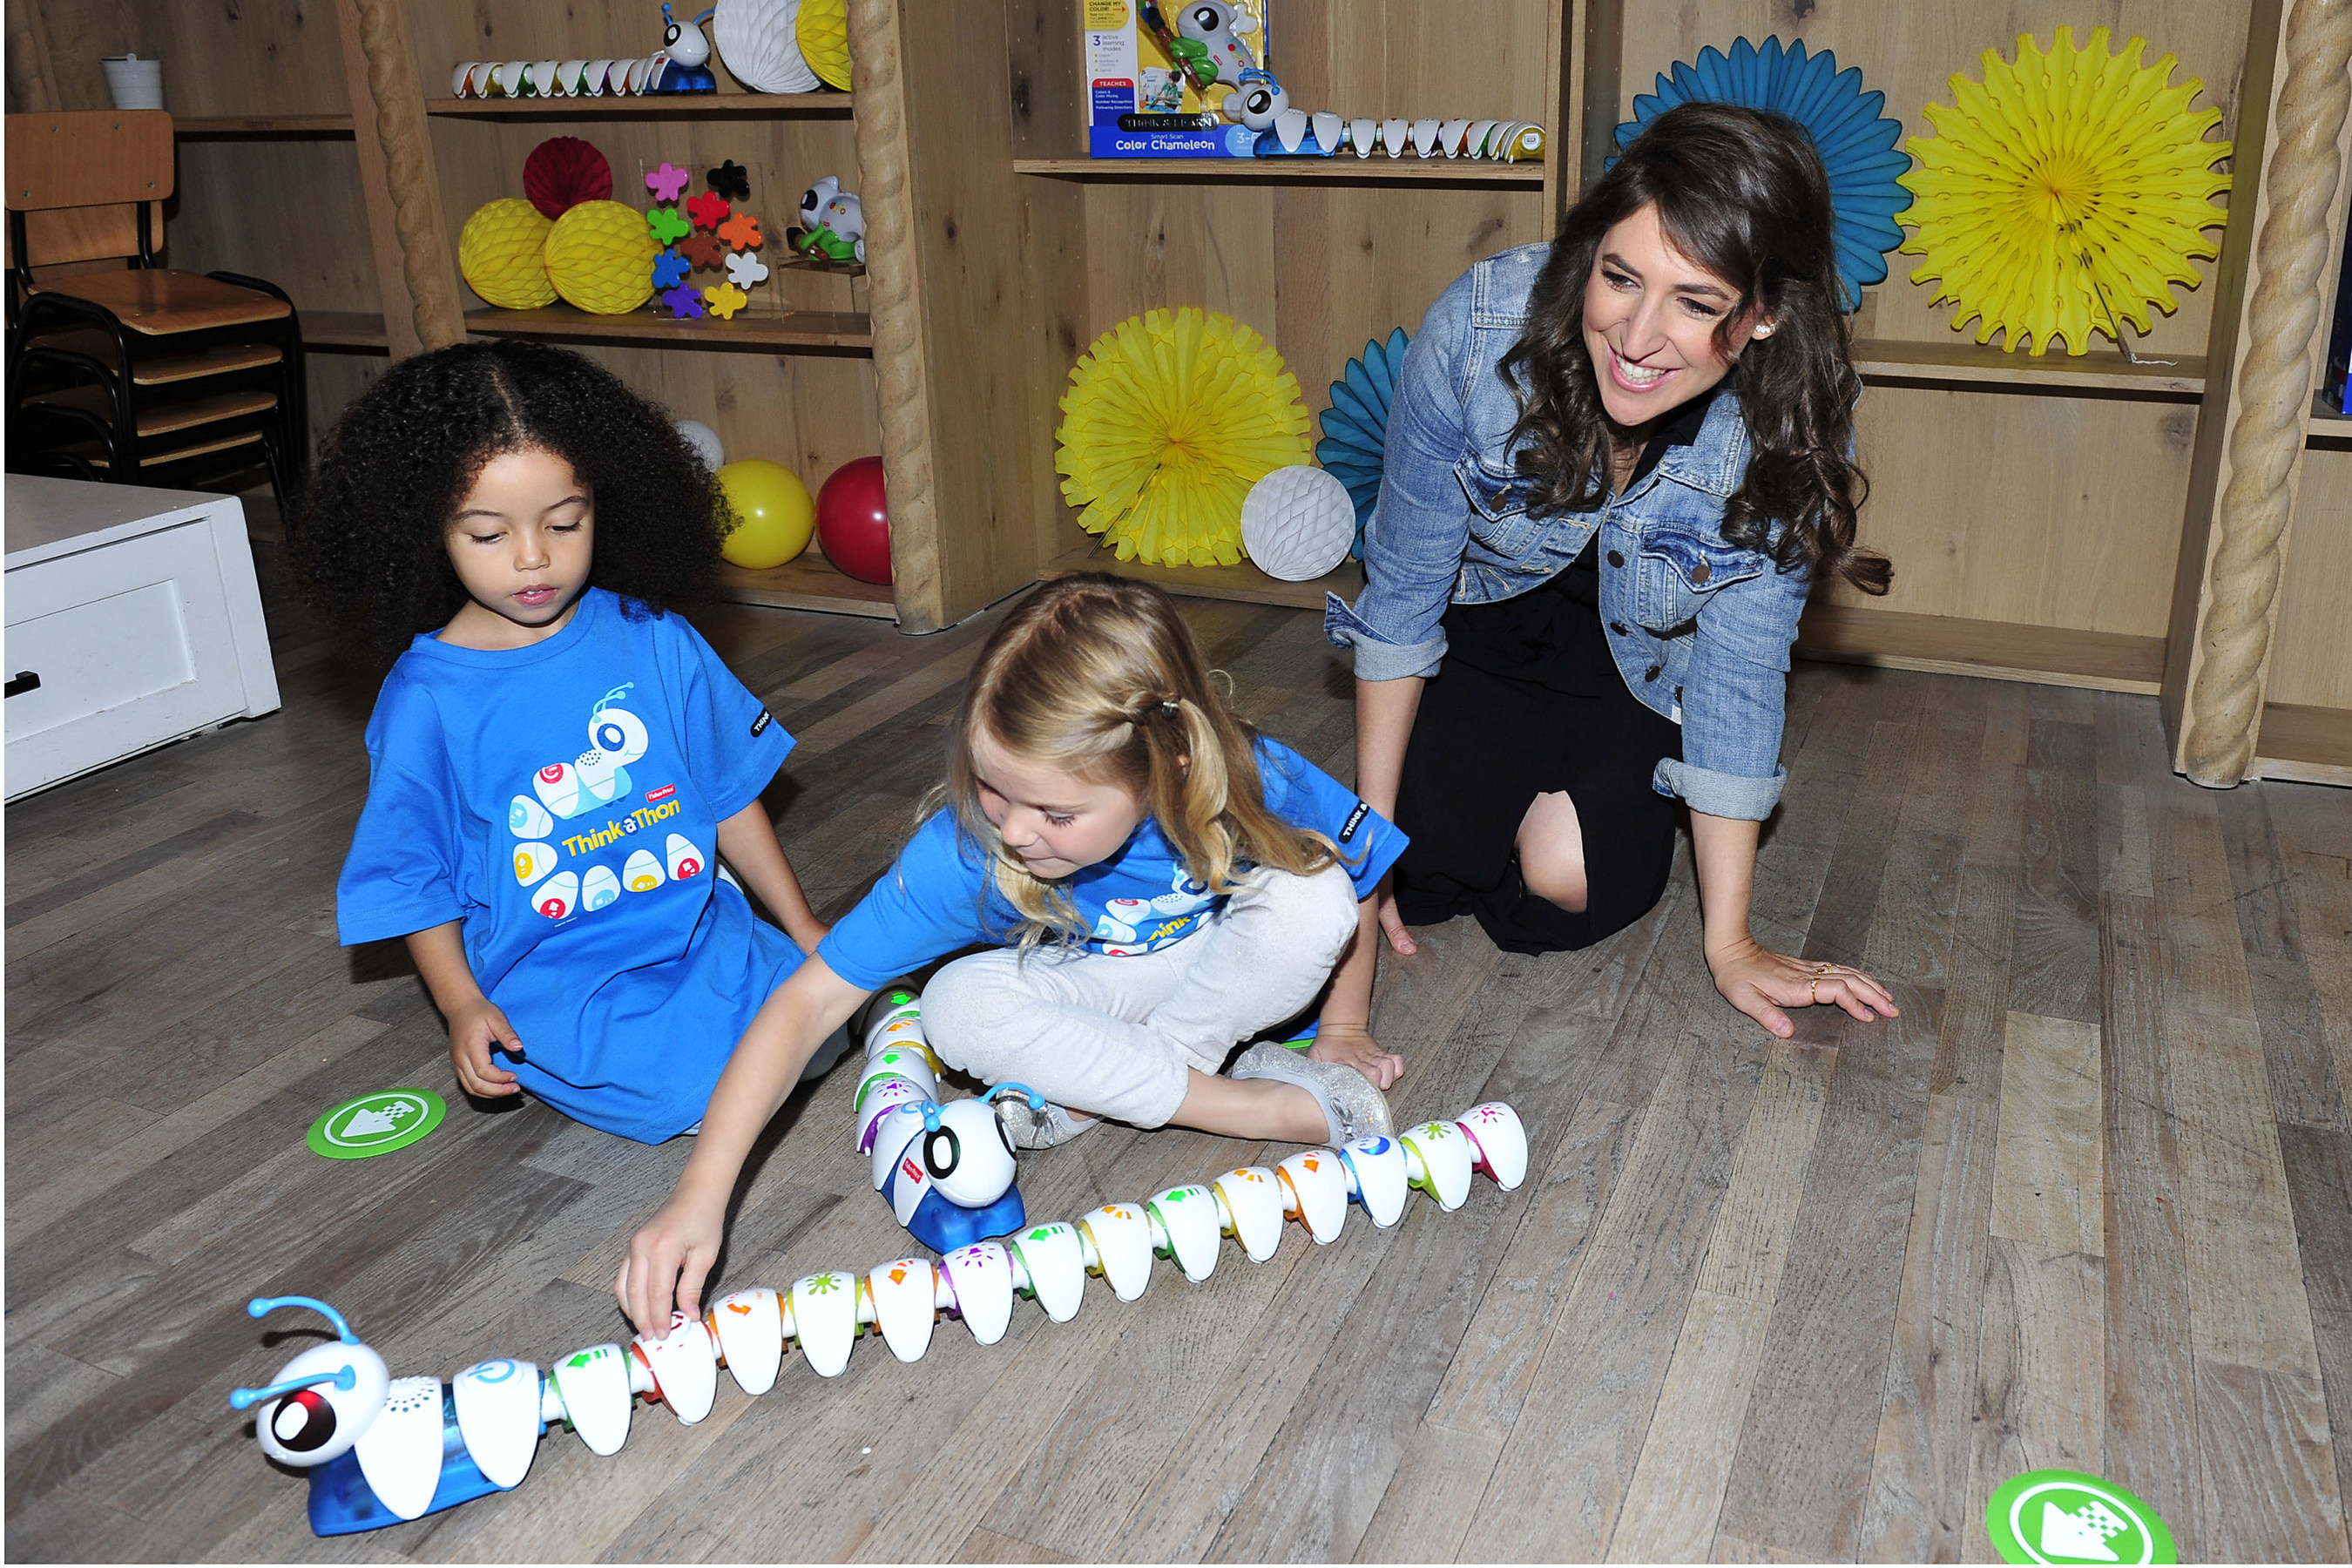 September 27, 2016 - STEM advocate, actress, and mom Mayim Bialik, hosts  the Fisher-Price Think-a-Thon event in Los Angeles, inviting preschoolers to learn through active play with the new Think & Learn line.